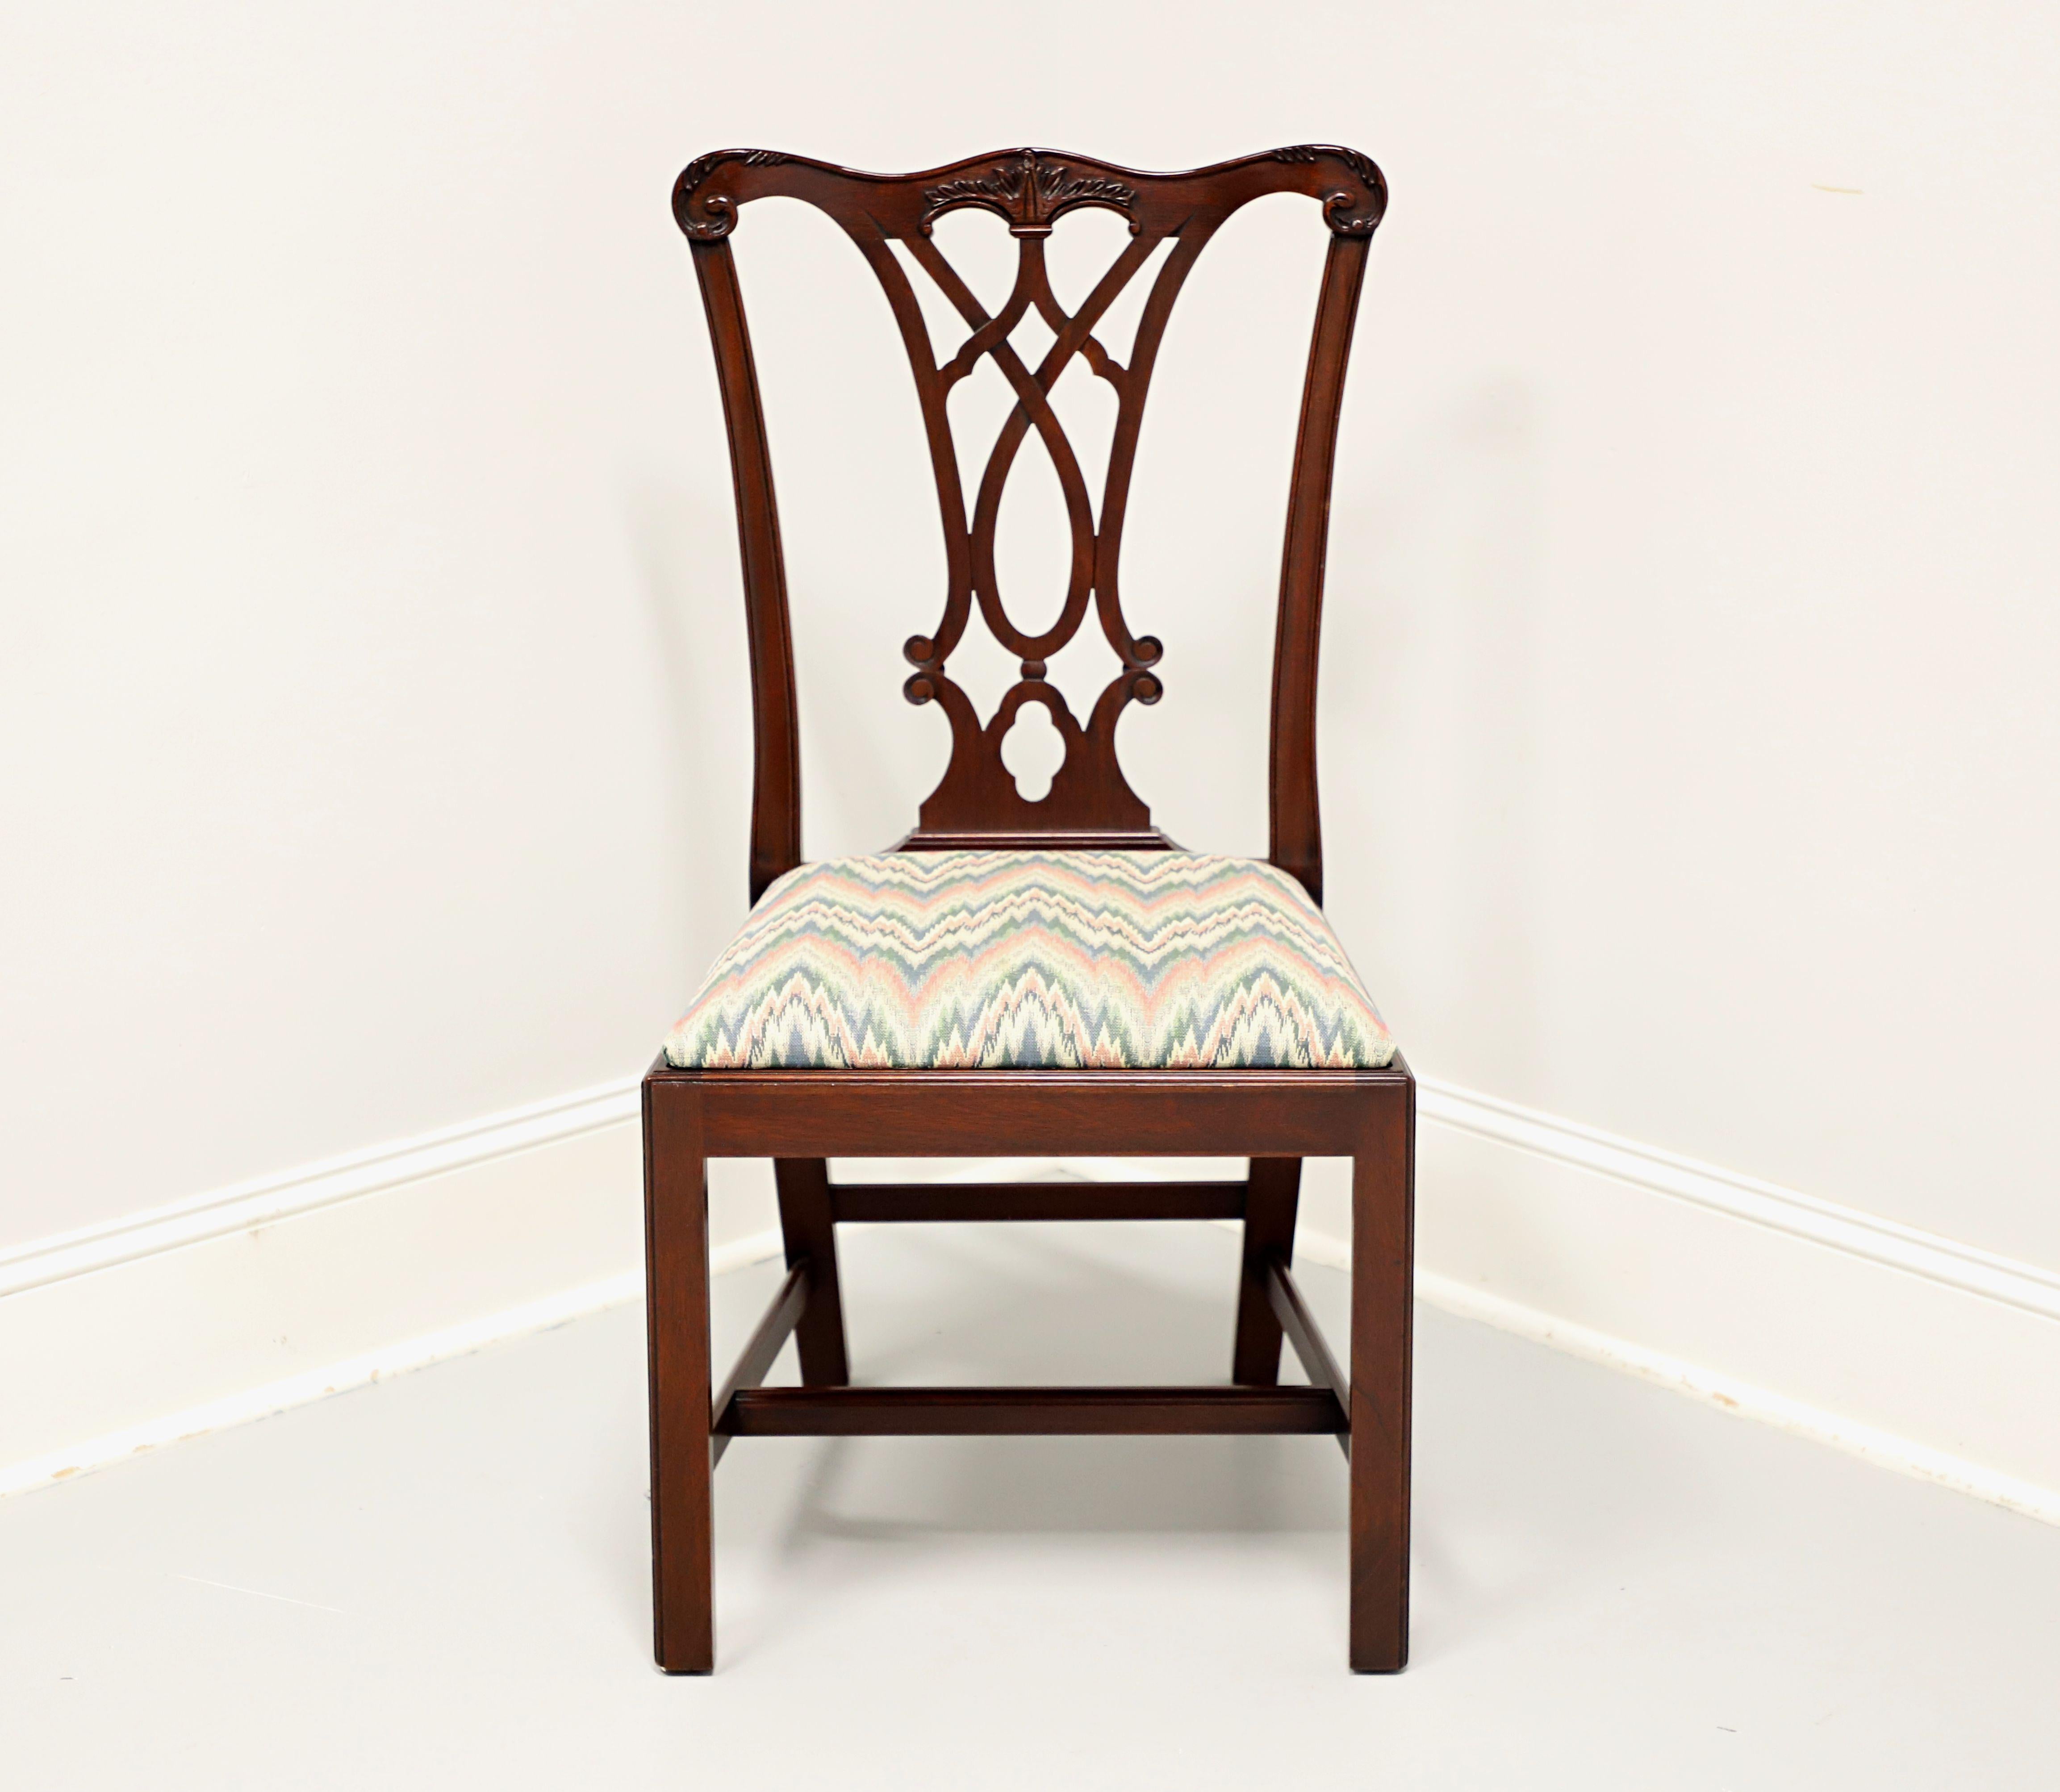 A Chippendale style dining side chair by Henkel Harris, of Winchester, Virginia, USA. Solid mahogany, carved crest rail & backrest, multi-color flame stitch pattern fabric upholstered seat, straight legs and stretchers. Made in 1992. 

Style #: